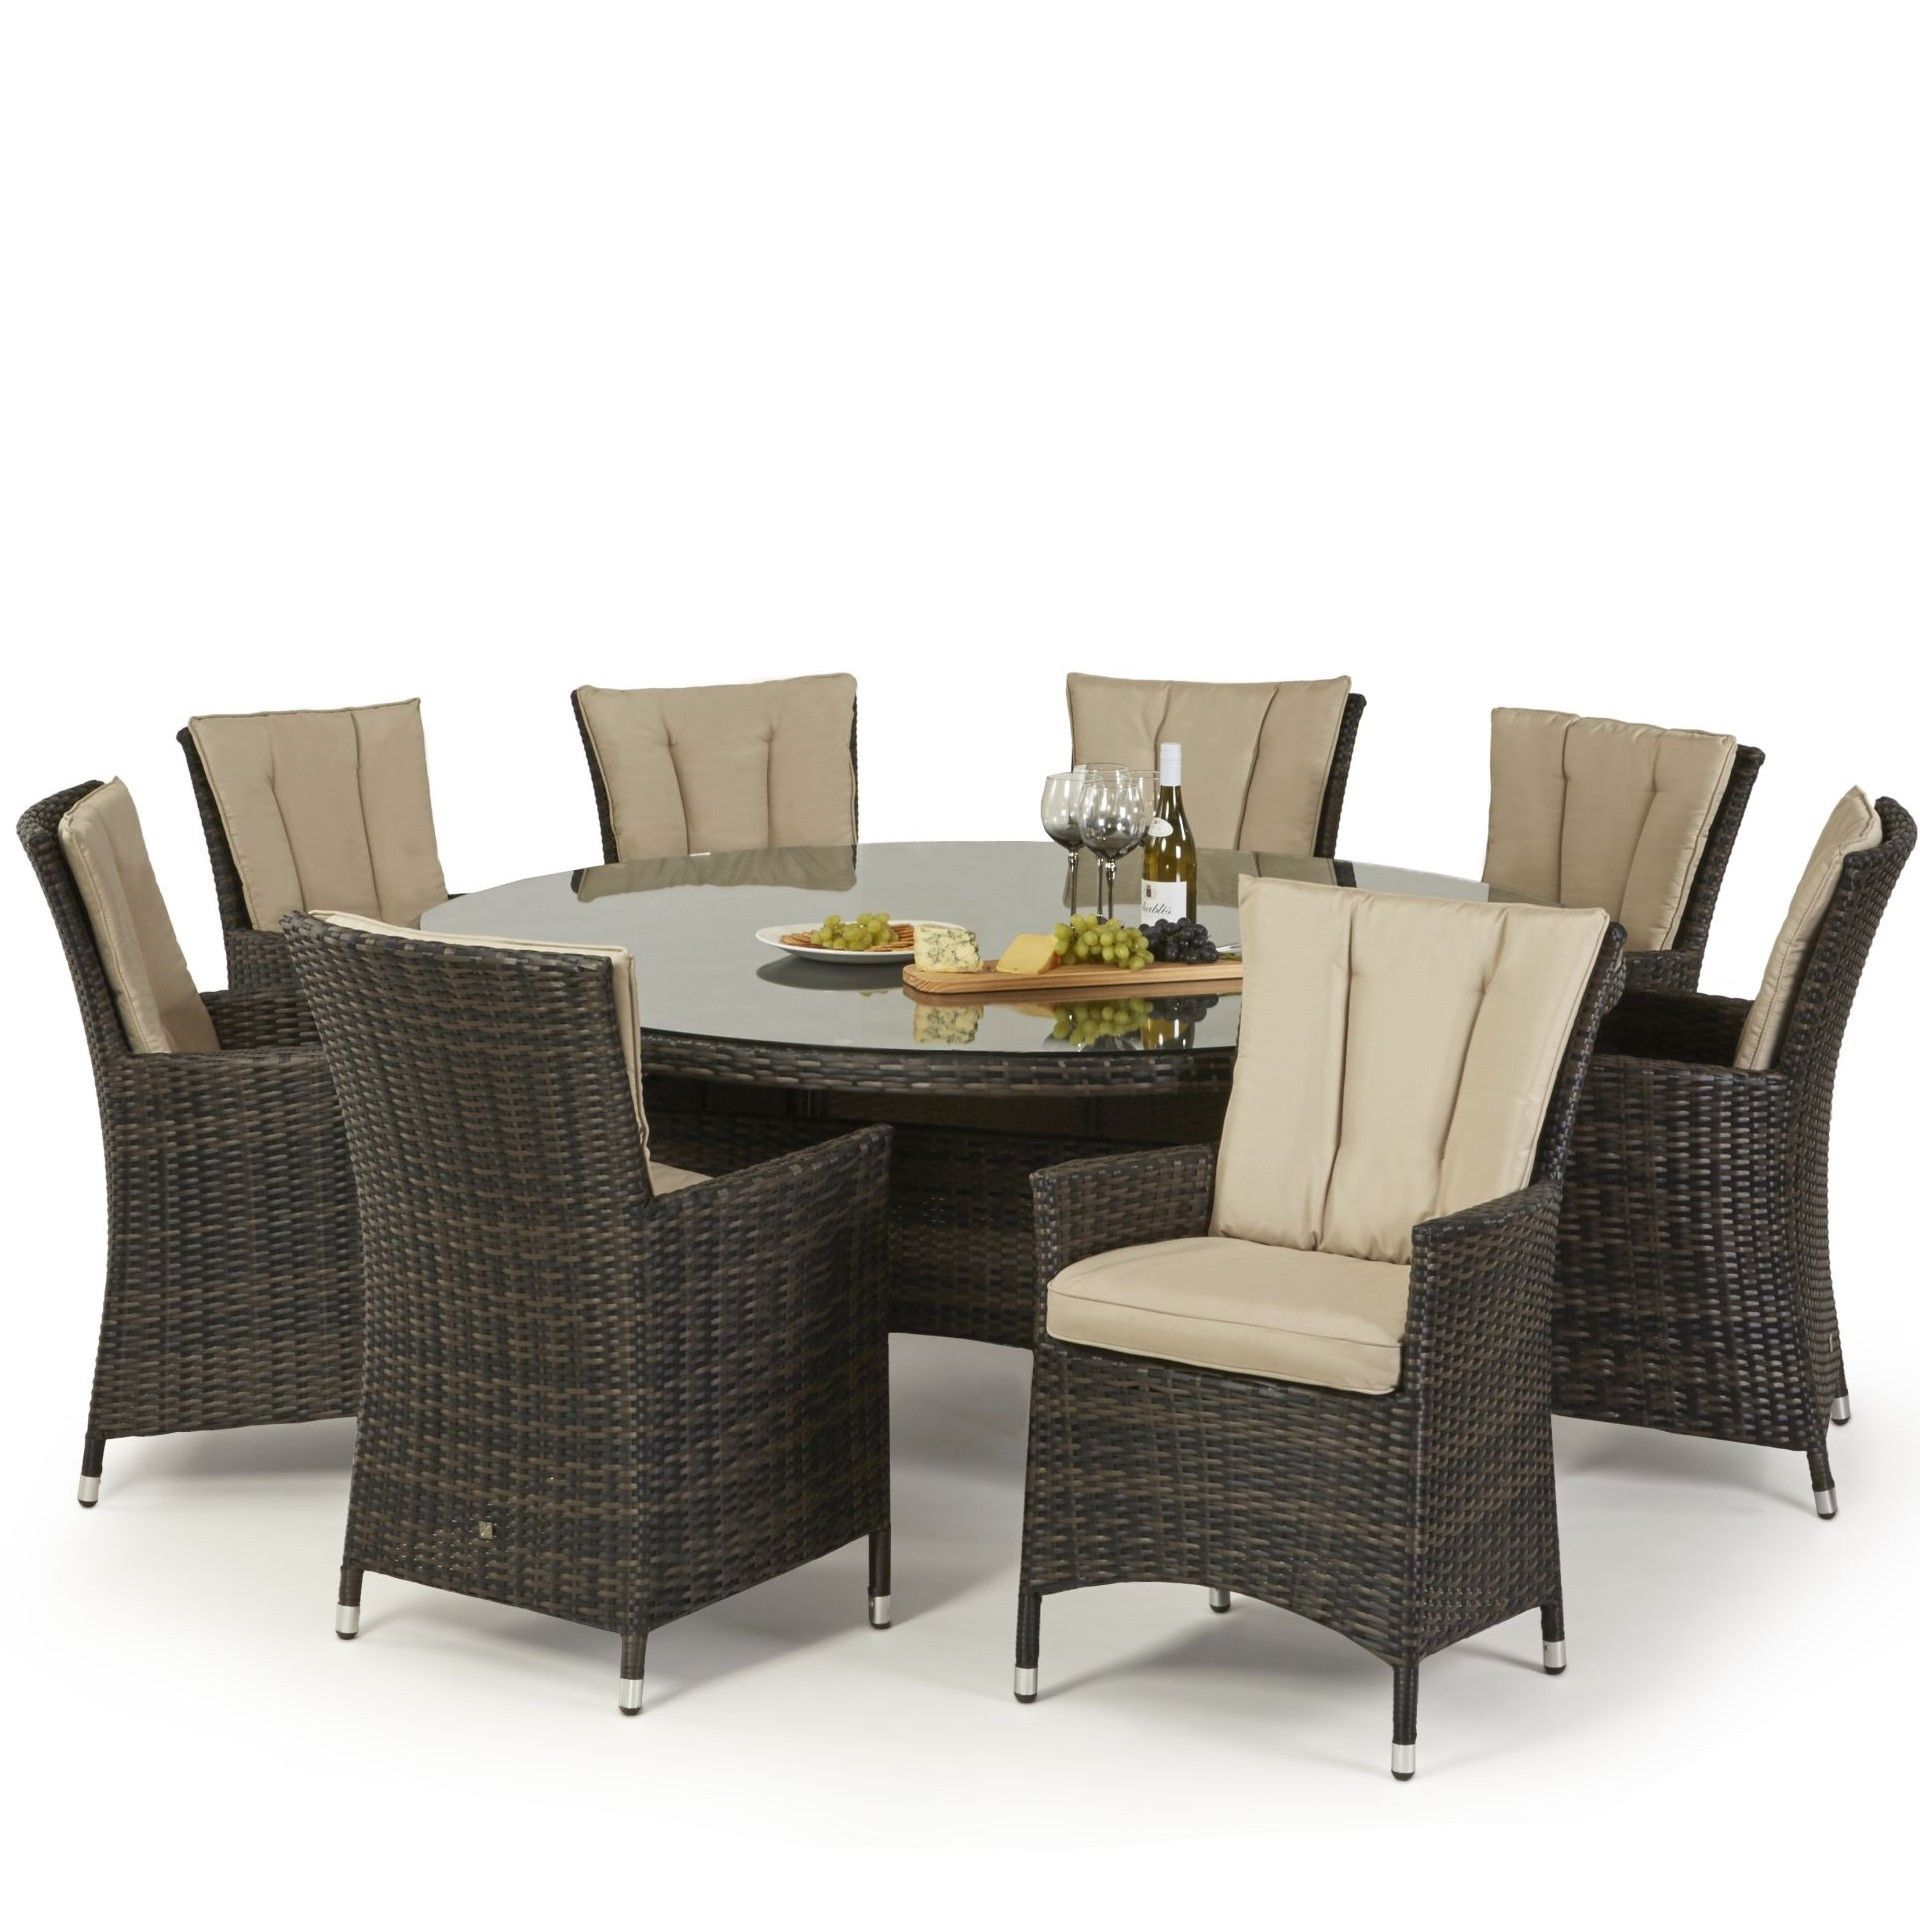 Rattan LA 8 Seat Round Outdoor Dining Set (Brown) *BRAND NEW* - Image 3 of 3